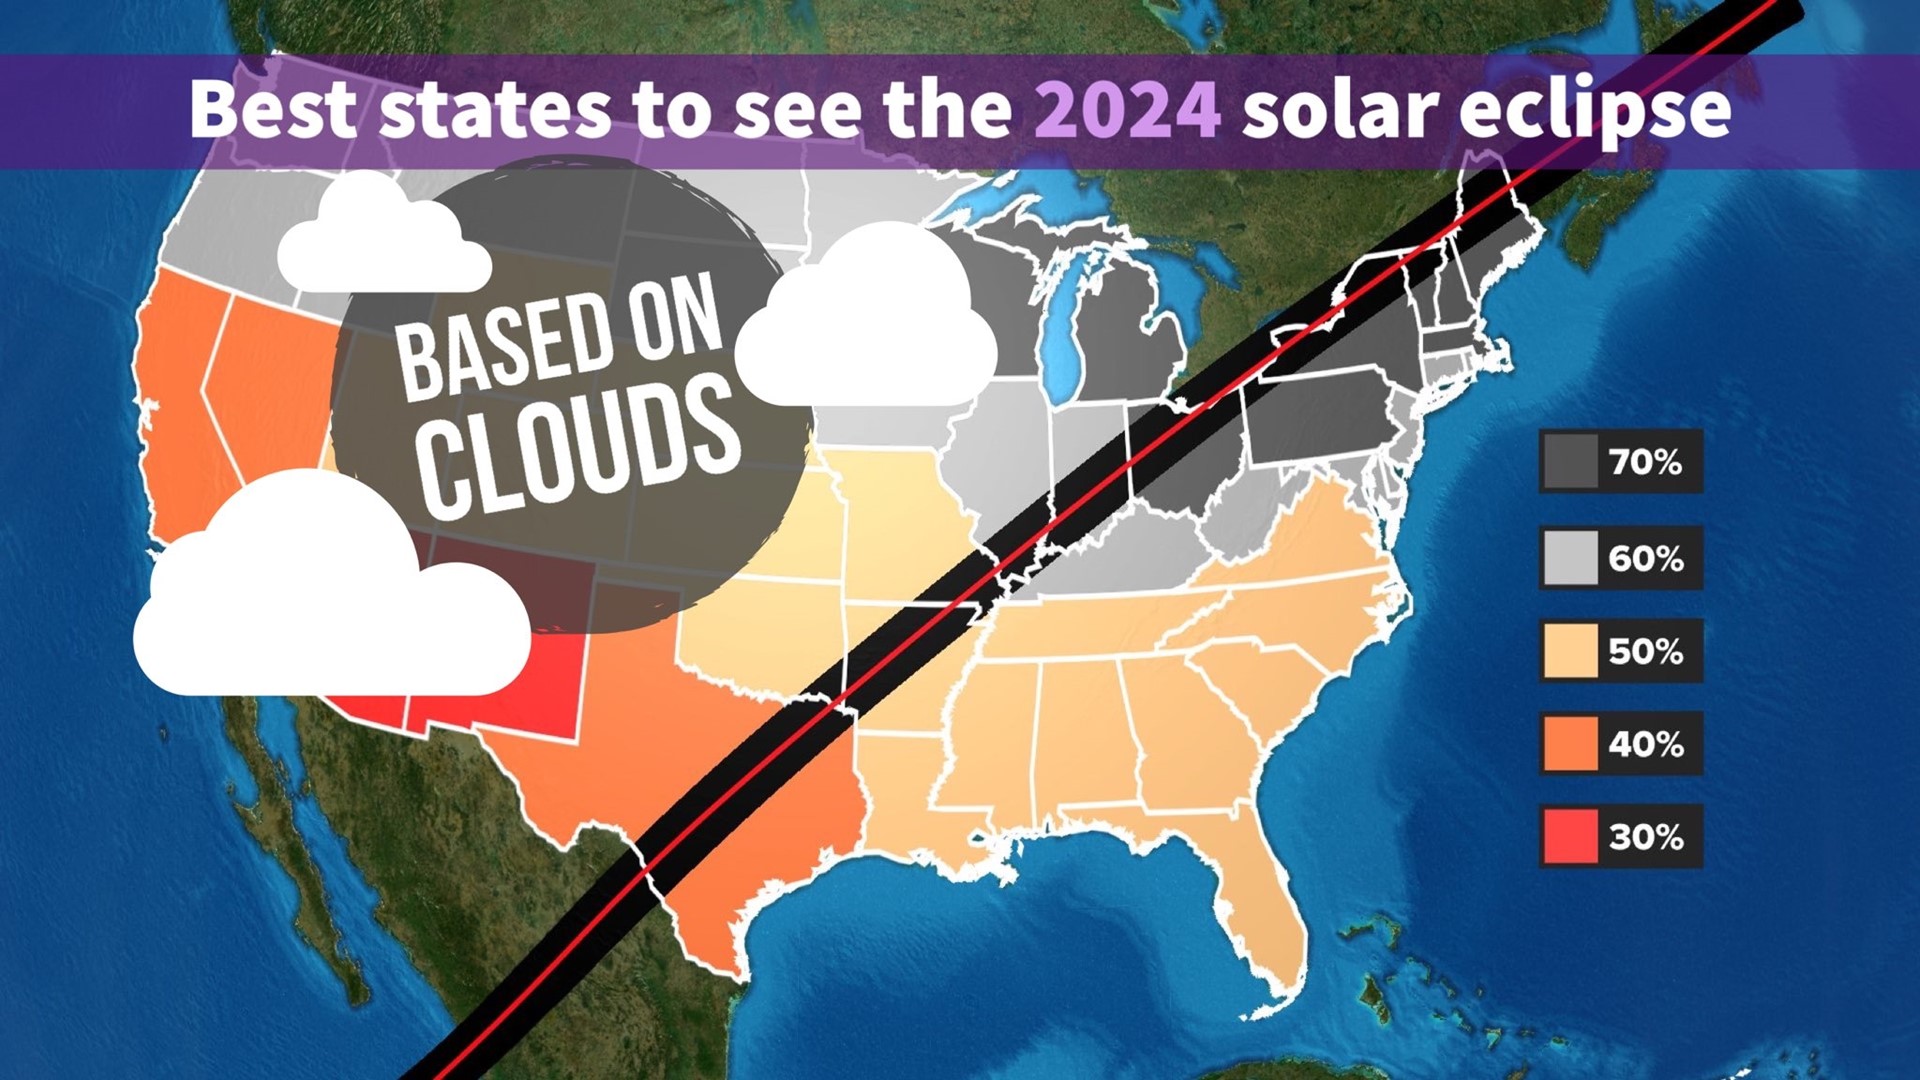 Solar Eclipse 2024 Which state will have the fewest clouds